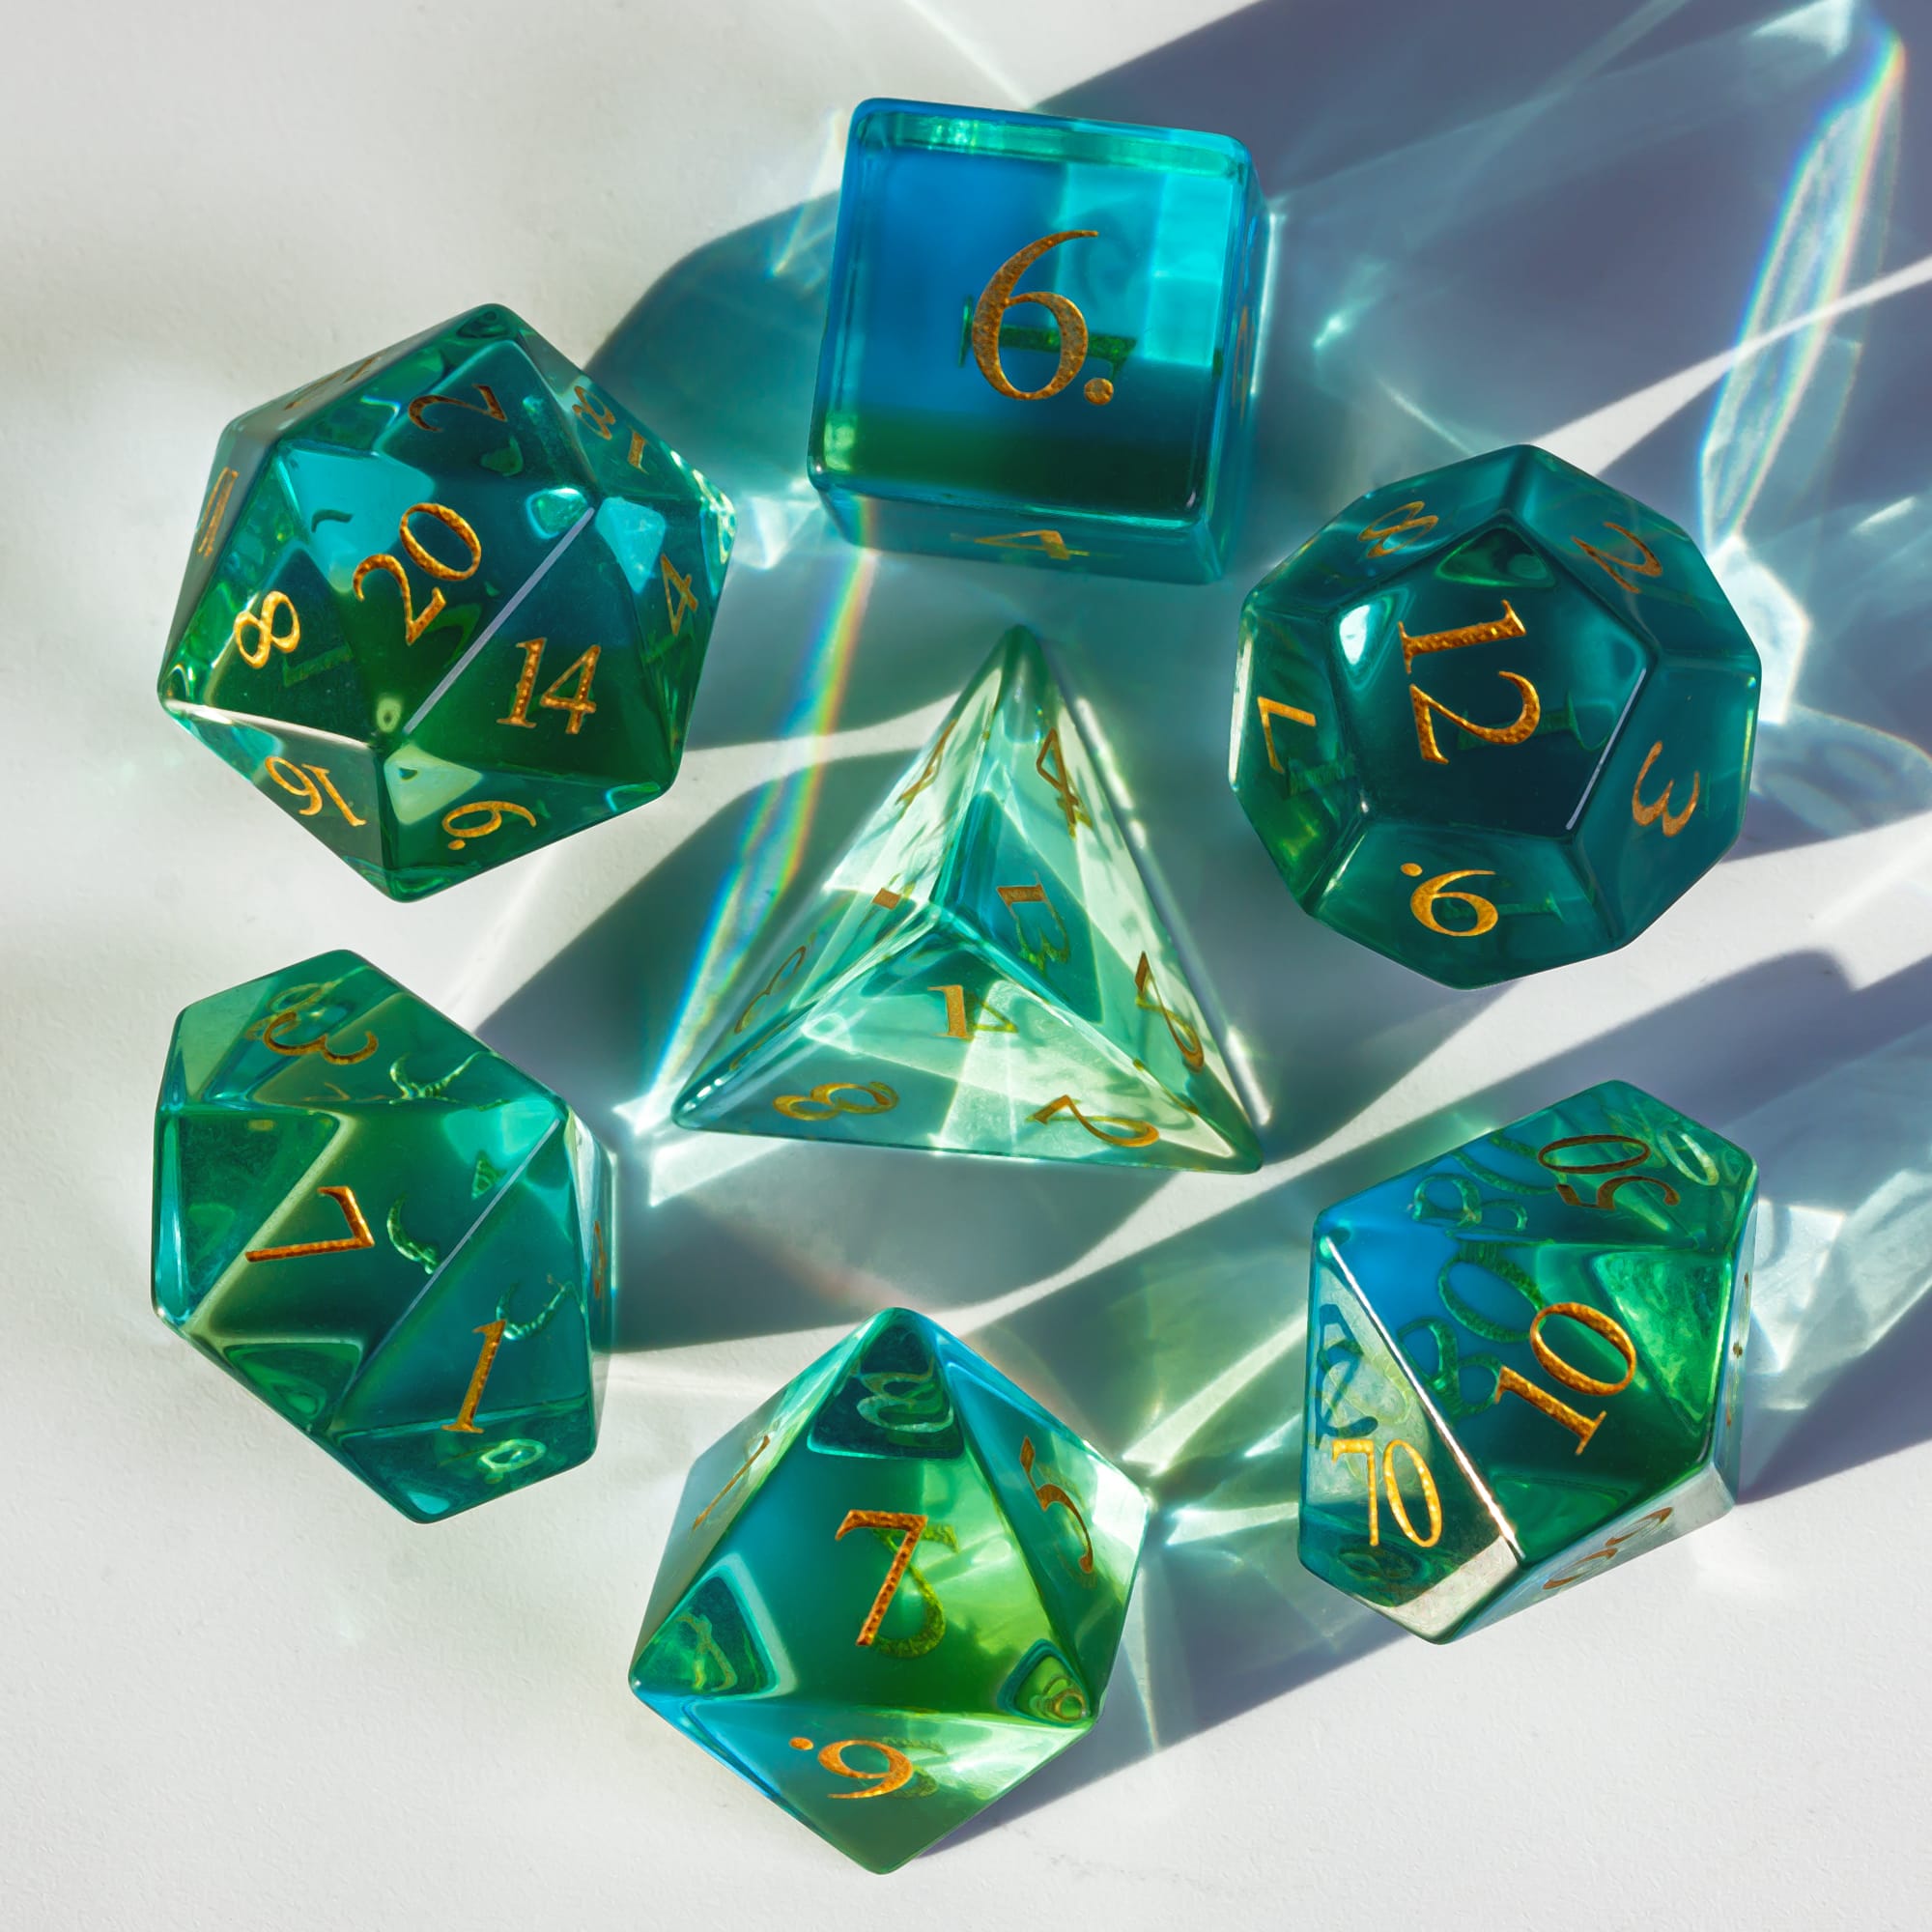 Cusdie Set of 7 Coloured Glaze Dice, 16mm Polyhedral Stone Dice Set with Leather Box, DND Dices for Collection